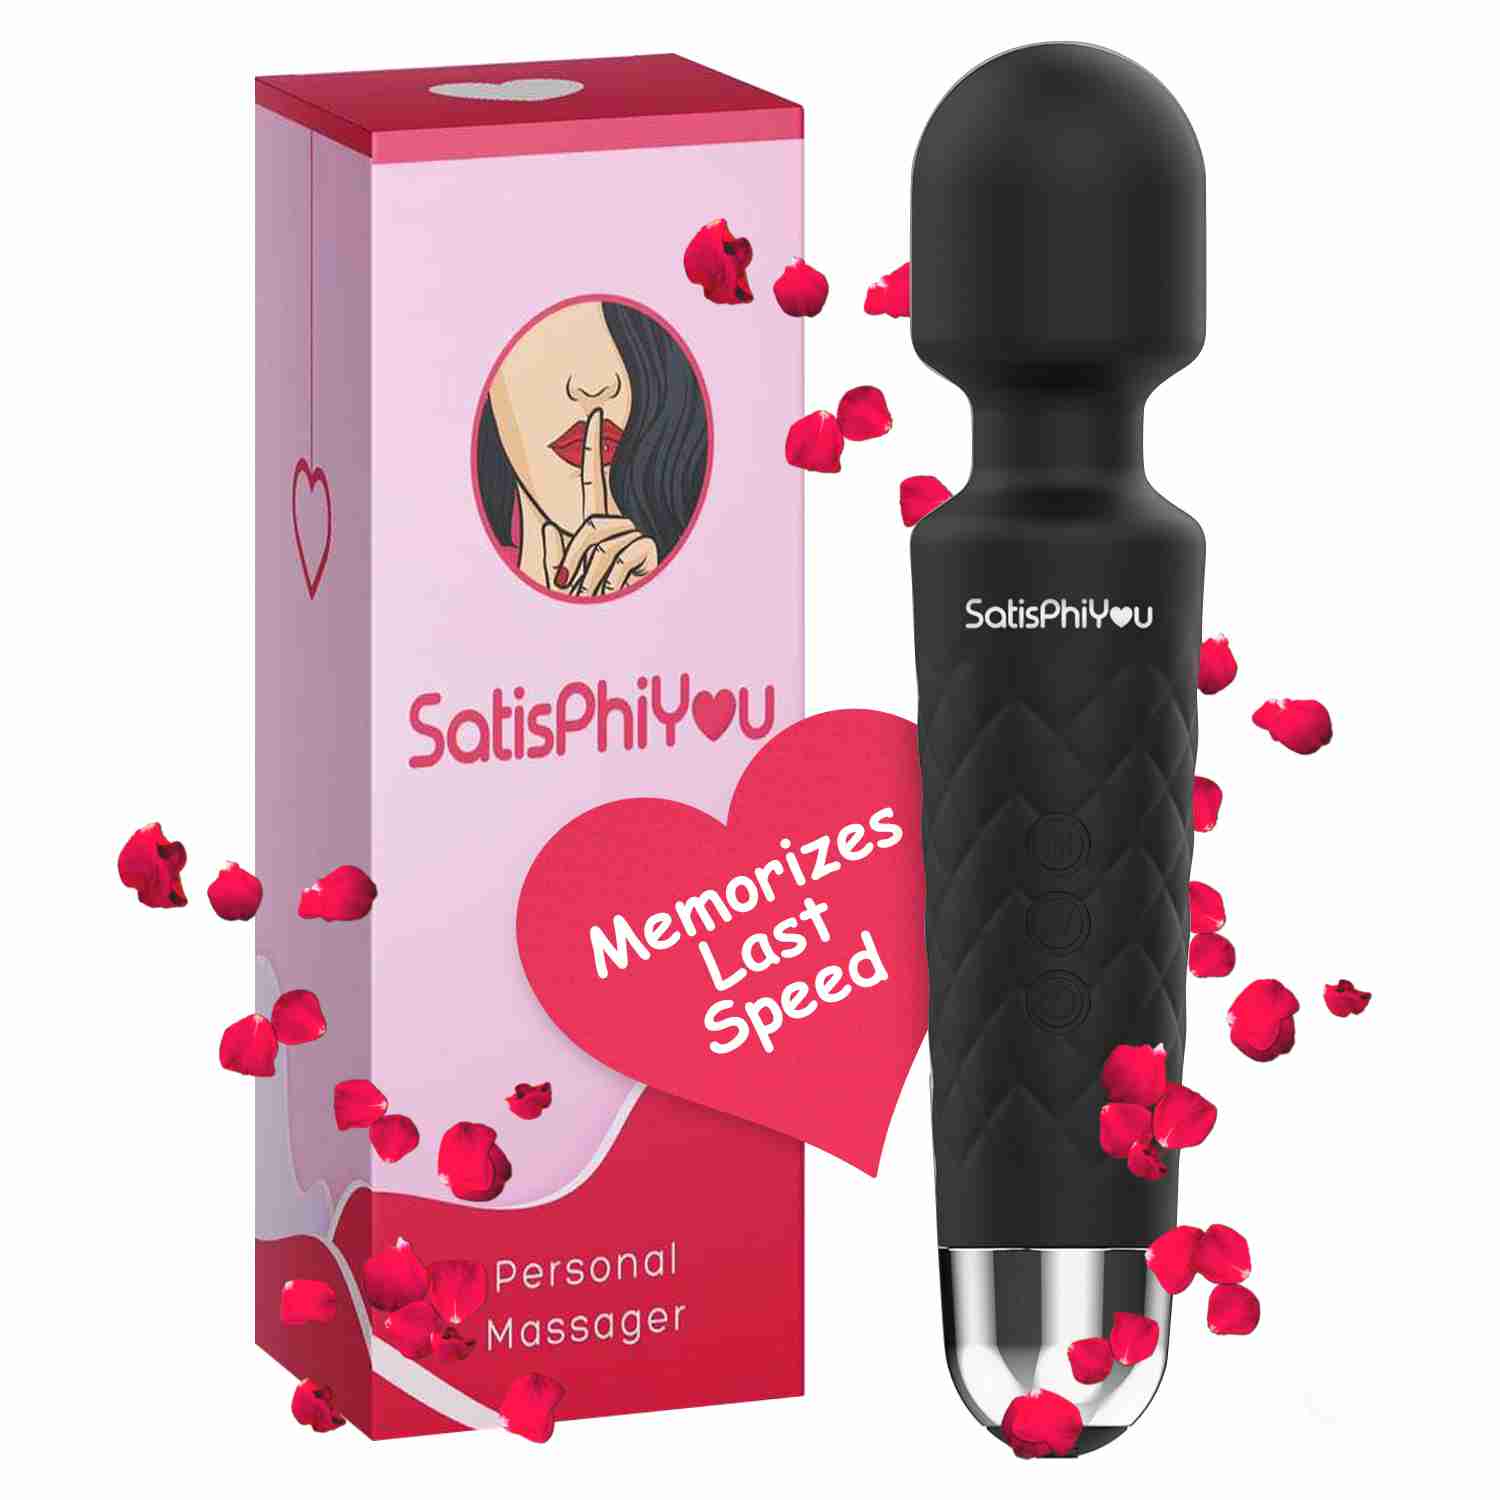 satisphiyou-personal-massager-for-women with cash back rebate